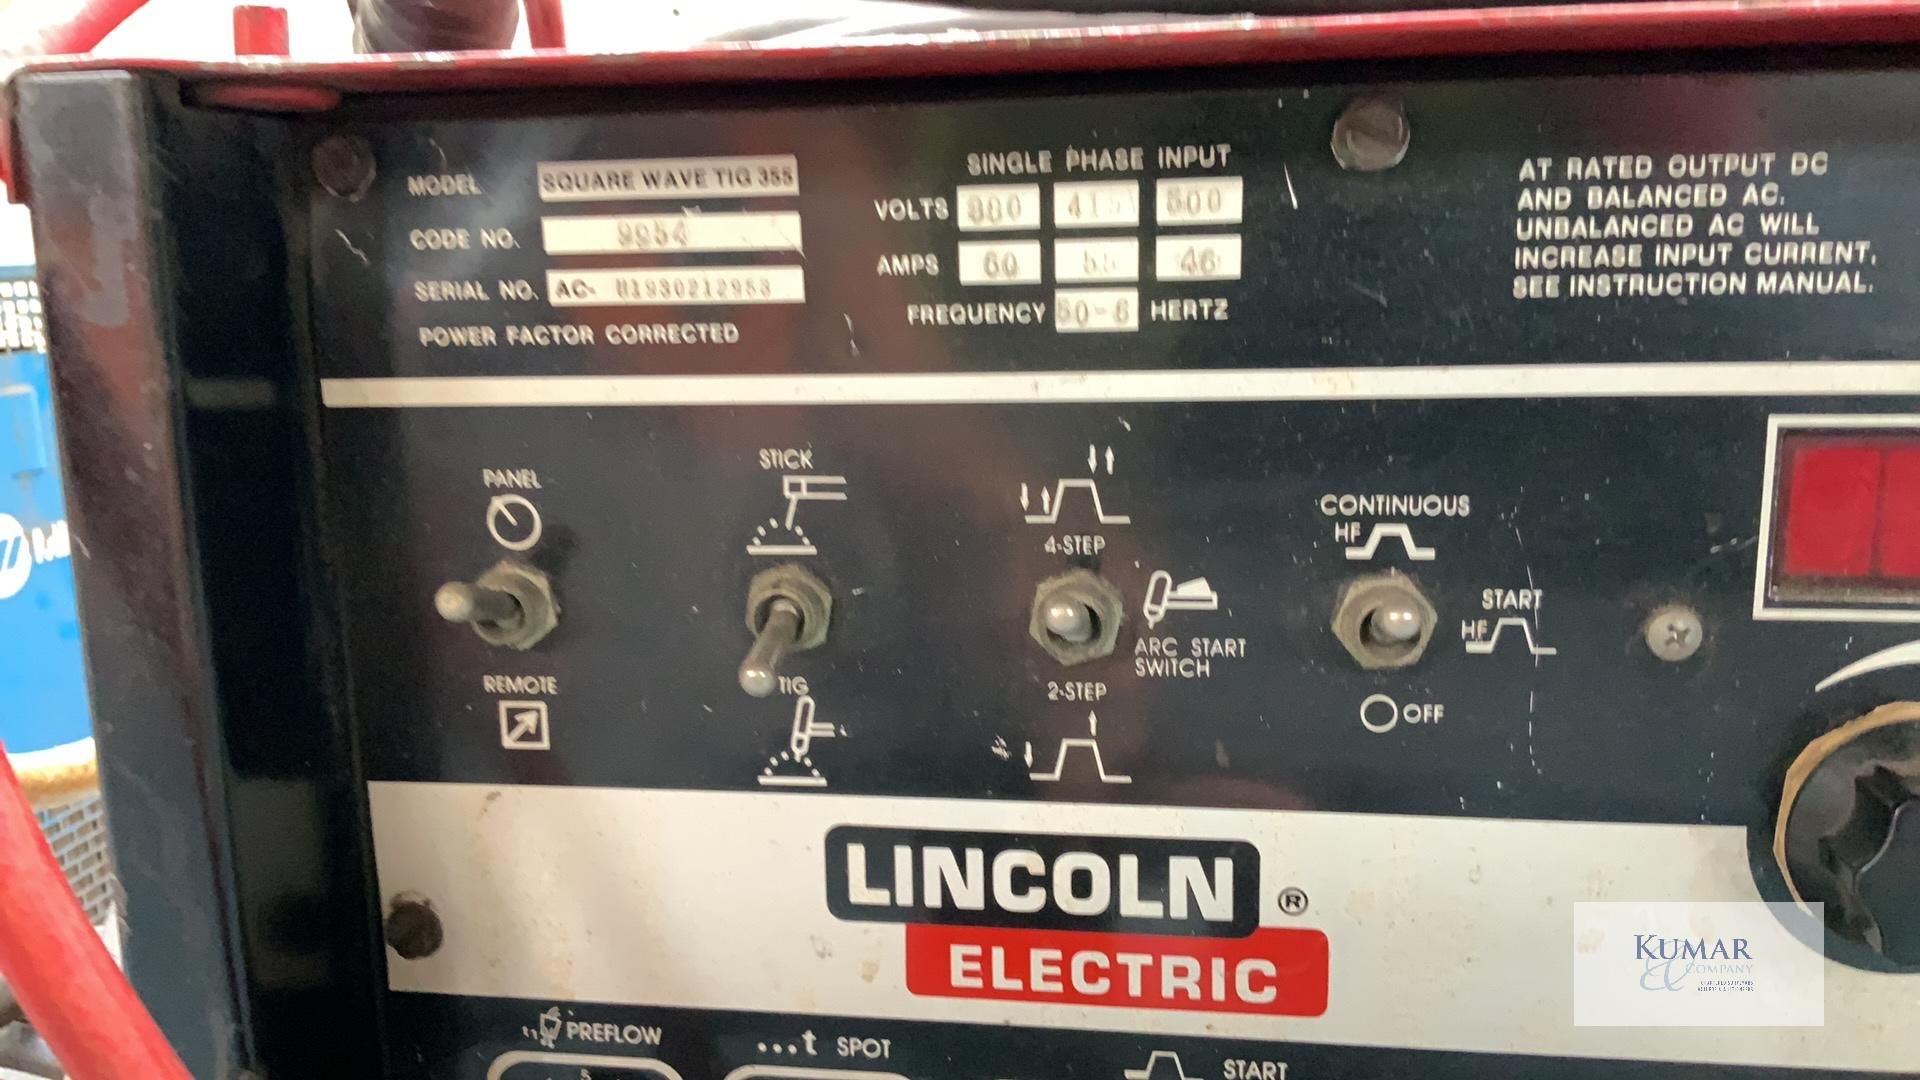 Lincoln Electric Tig 355 Square Wave AC/DC Tig & Stick ArcWelding Power Source, Serial No. - Image 3 of 11